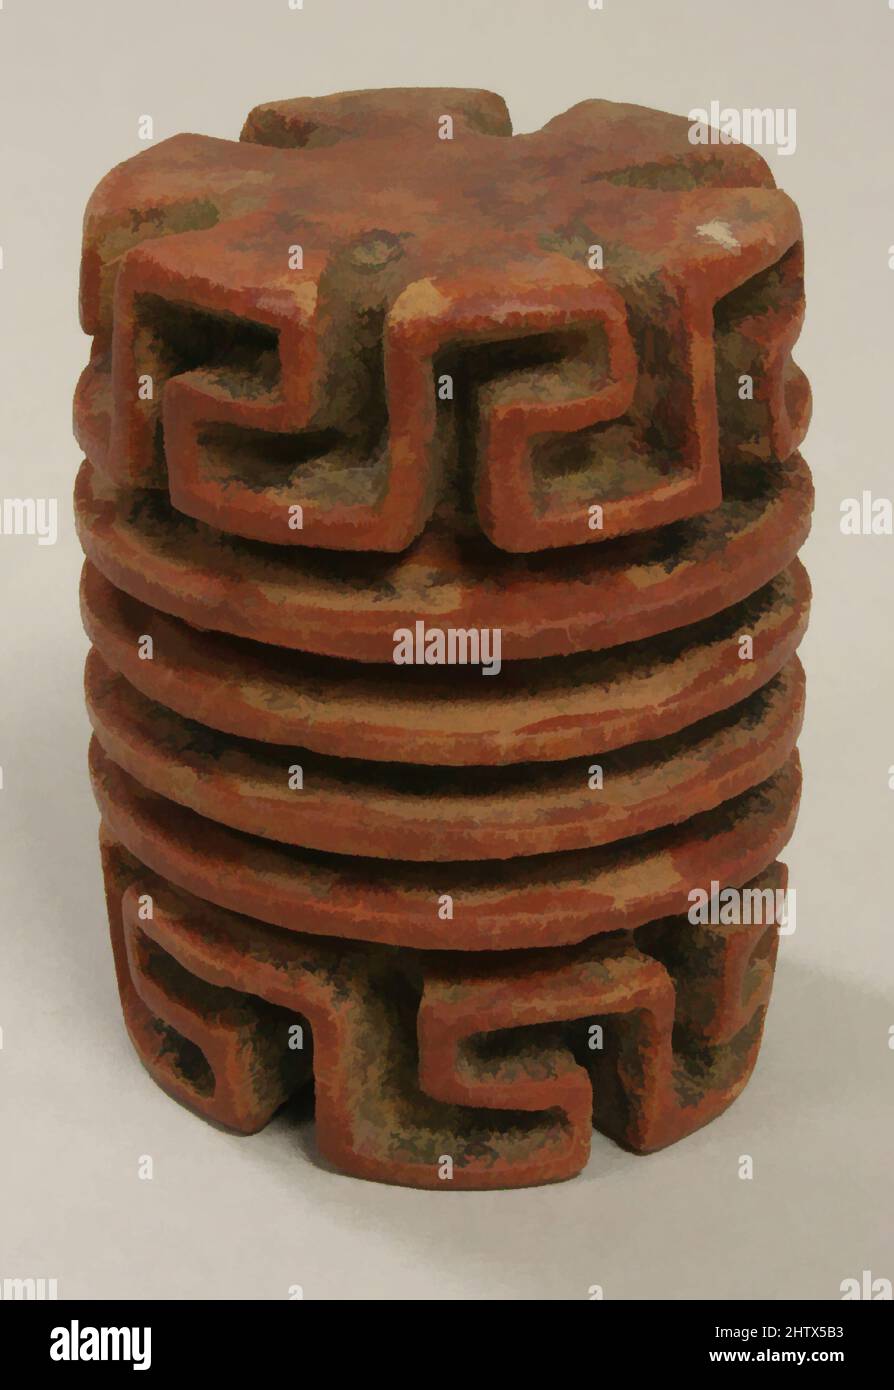 Art inspired by Rolelr Stamp, 5th–6th century, Costa Rica, Atlantic Watershed, Ceramic, H. 2 in. x Diam. 1 1/2 in. (5.1 x 3.8 cm), Ceramics-Implements, Classic works modernized by Artotop with a splash of modernity. Shapes, color and value, eye-catching visual impact on art. Emotions through freedom of artworks in a contemporary way. A timeless message pursuing a wildly creative new direction. Artists turning to the digital medium and creating the Artotop NFT Stock Photo